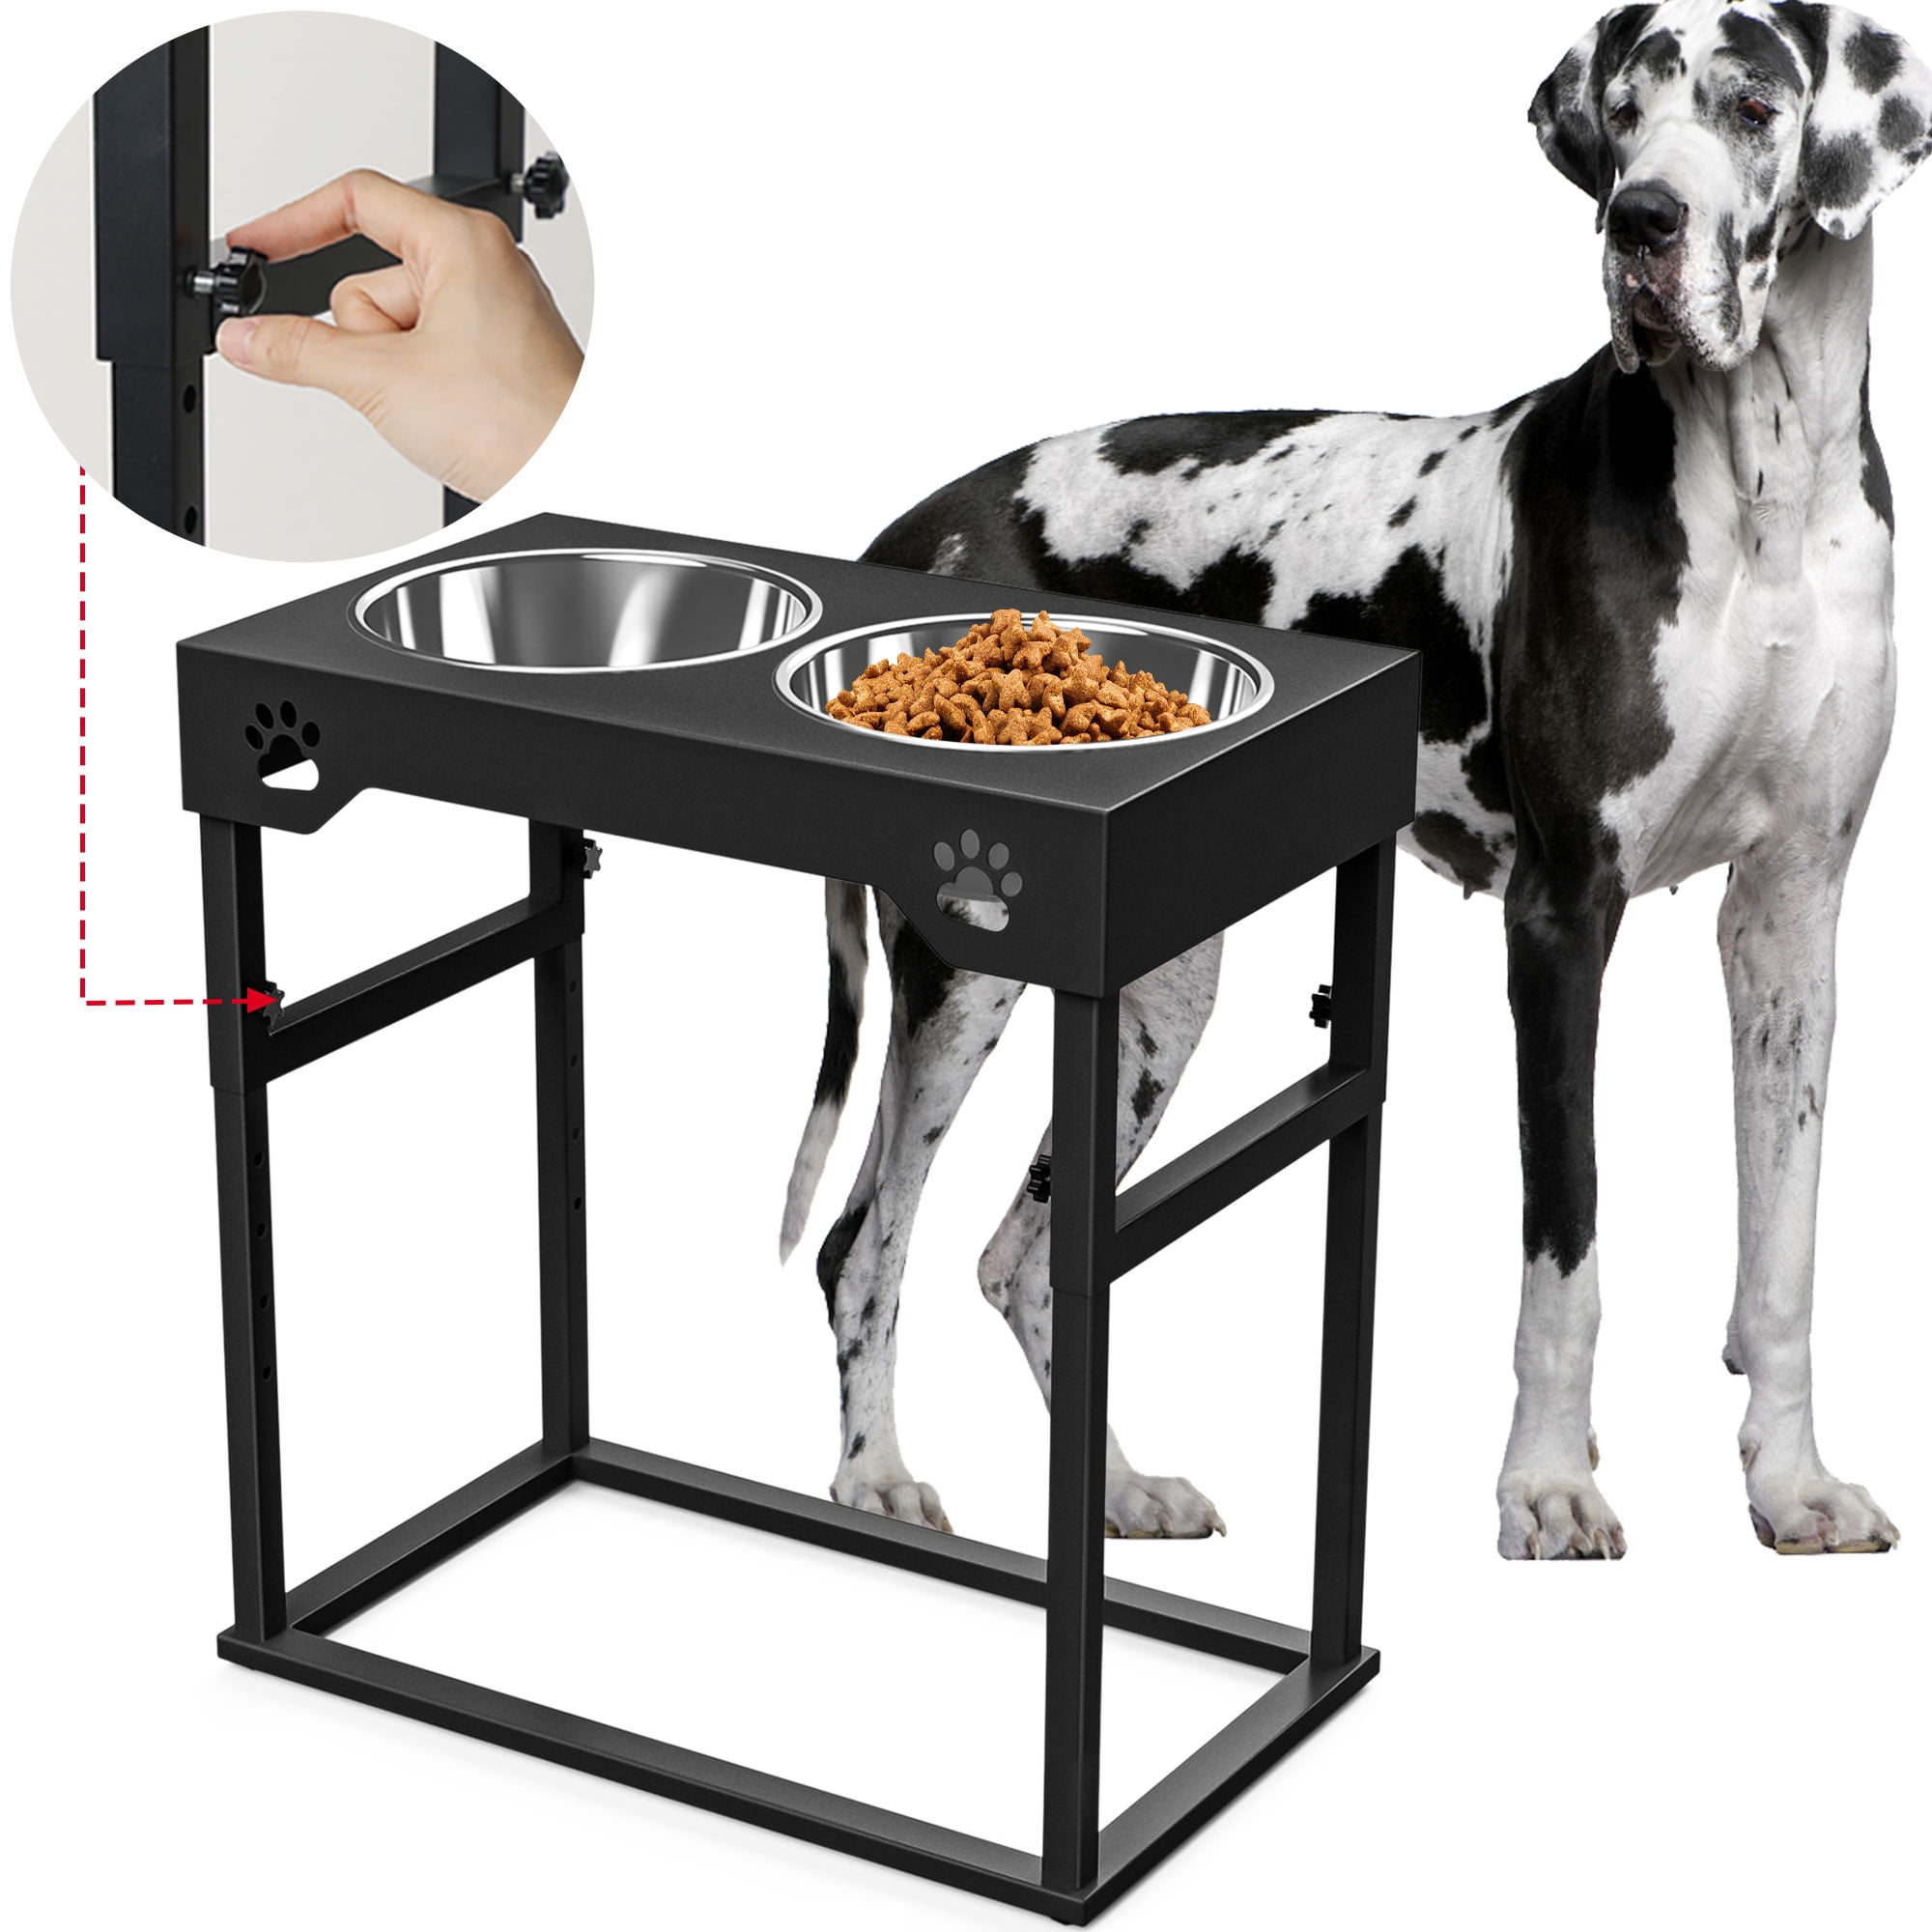 ZALALOVA Elevated Dog Bowls Stand with 2 Stainless Steel Dishes, Raised Dog  Bowl Adjusts to 5 Heights (3.15, 8.9, 10,11.2, 12.4) for Medium and